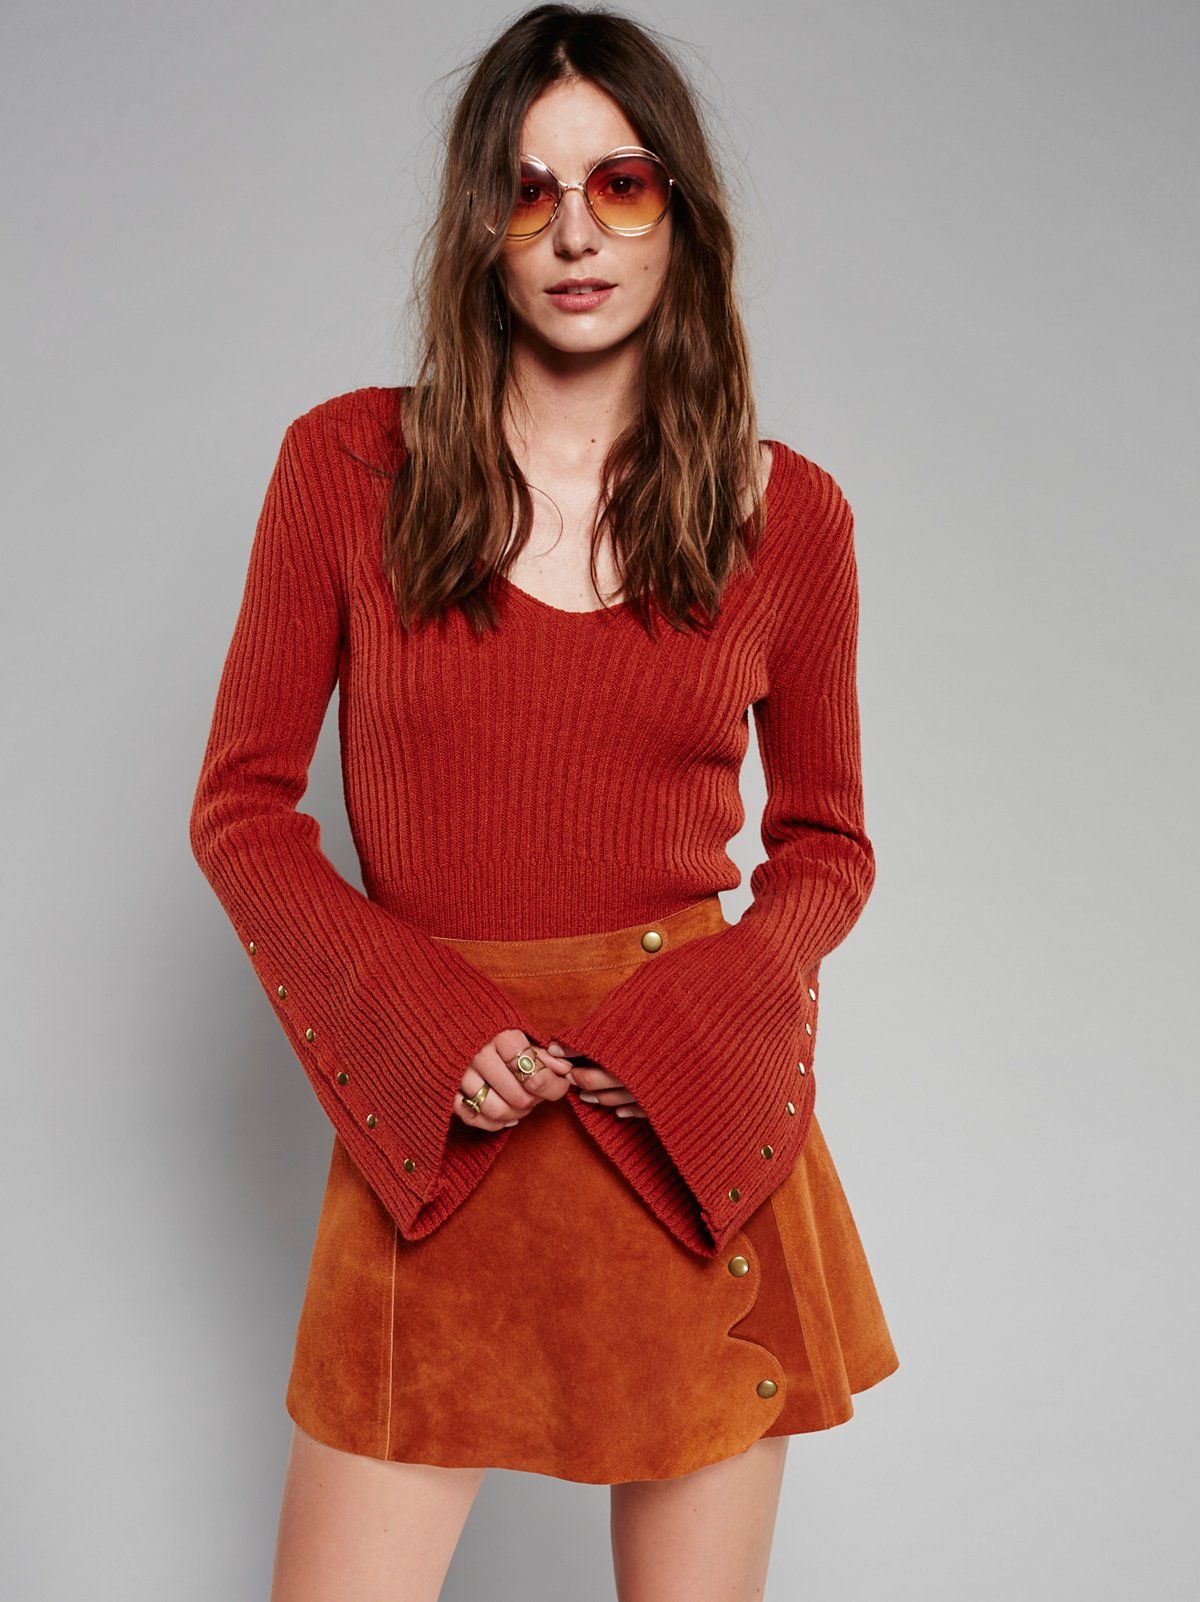 https://www.freepeople.com/shop/viola-double-v-sweater-/ | Free People